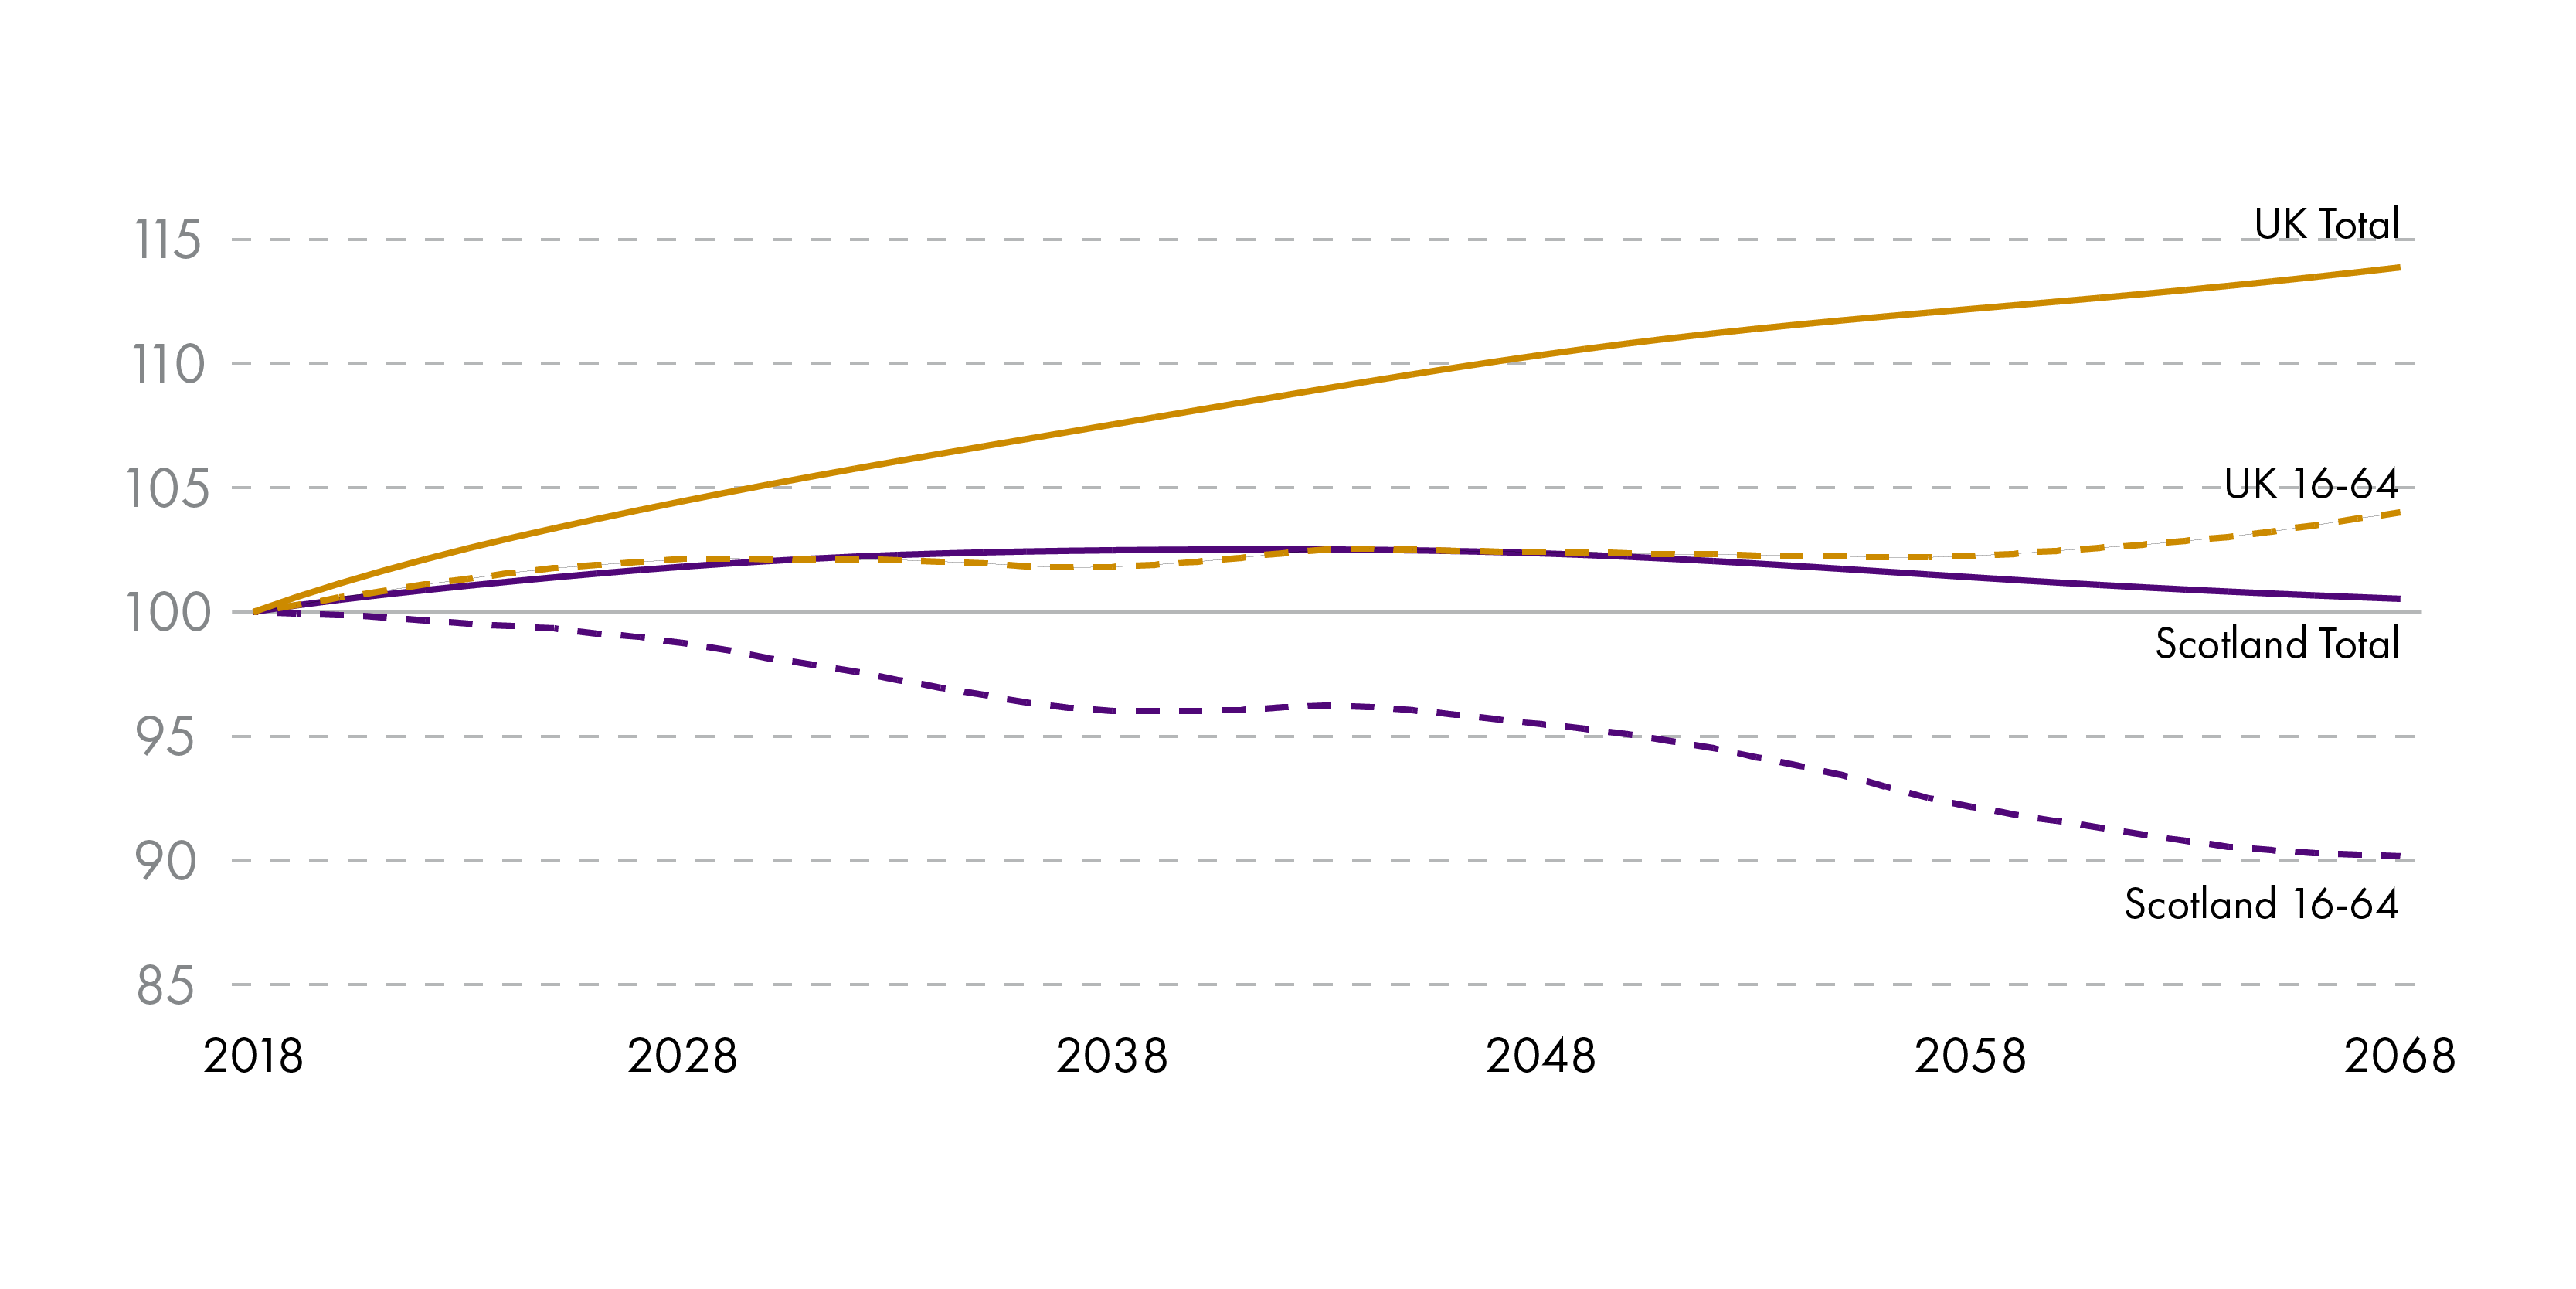 Figure 9 shows the size of Scotland's total population and its population aged between 16 and 16 compared to the UK equivalents between 2018 and 2068. Scotland's total population and working age population are predicted to fall whilst the Uk's total population and working age population are predicted to rise.